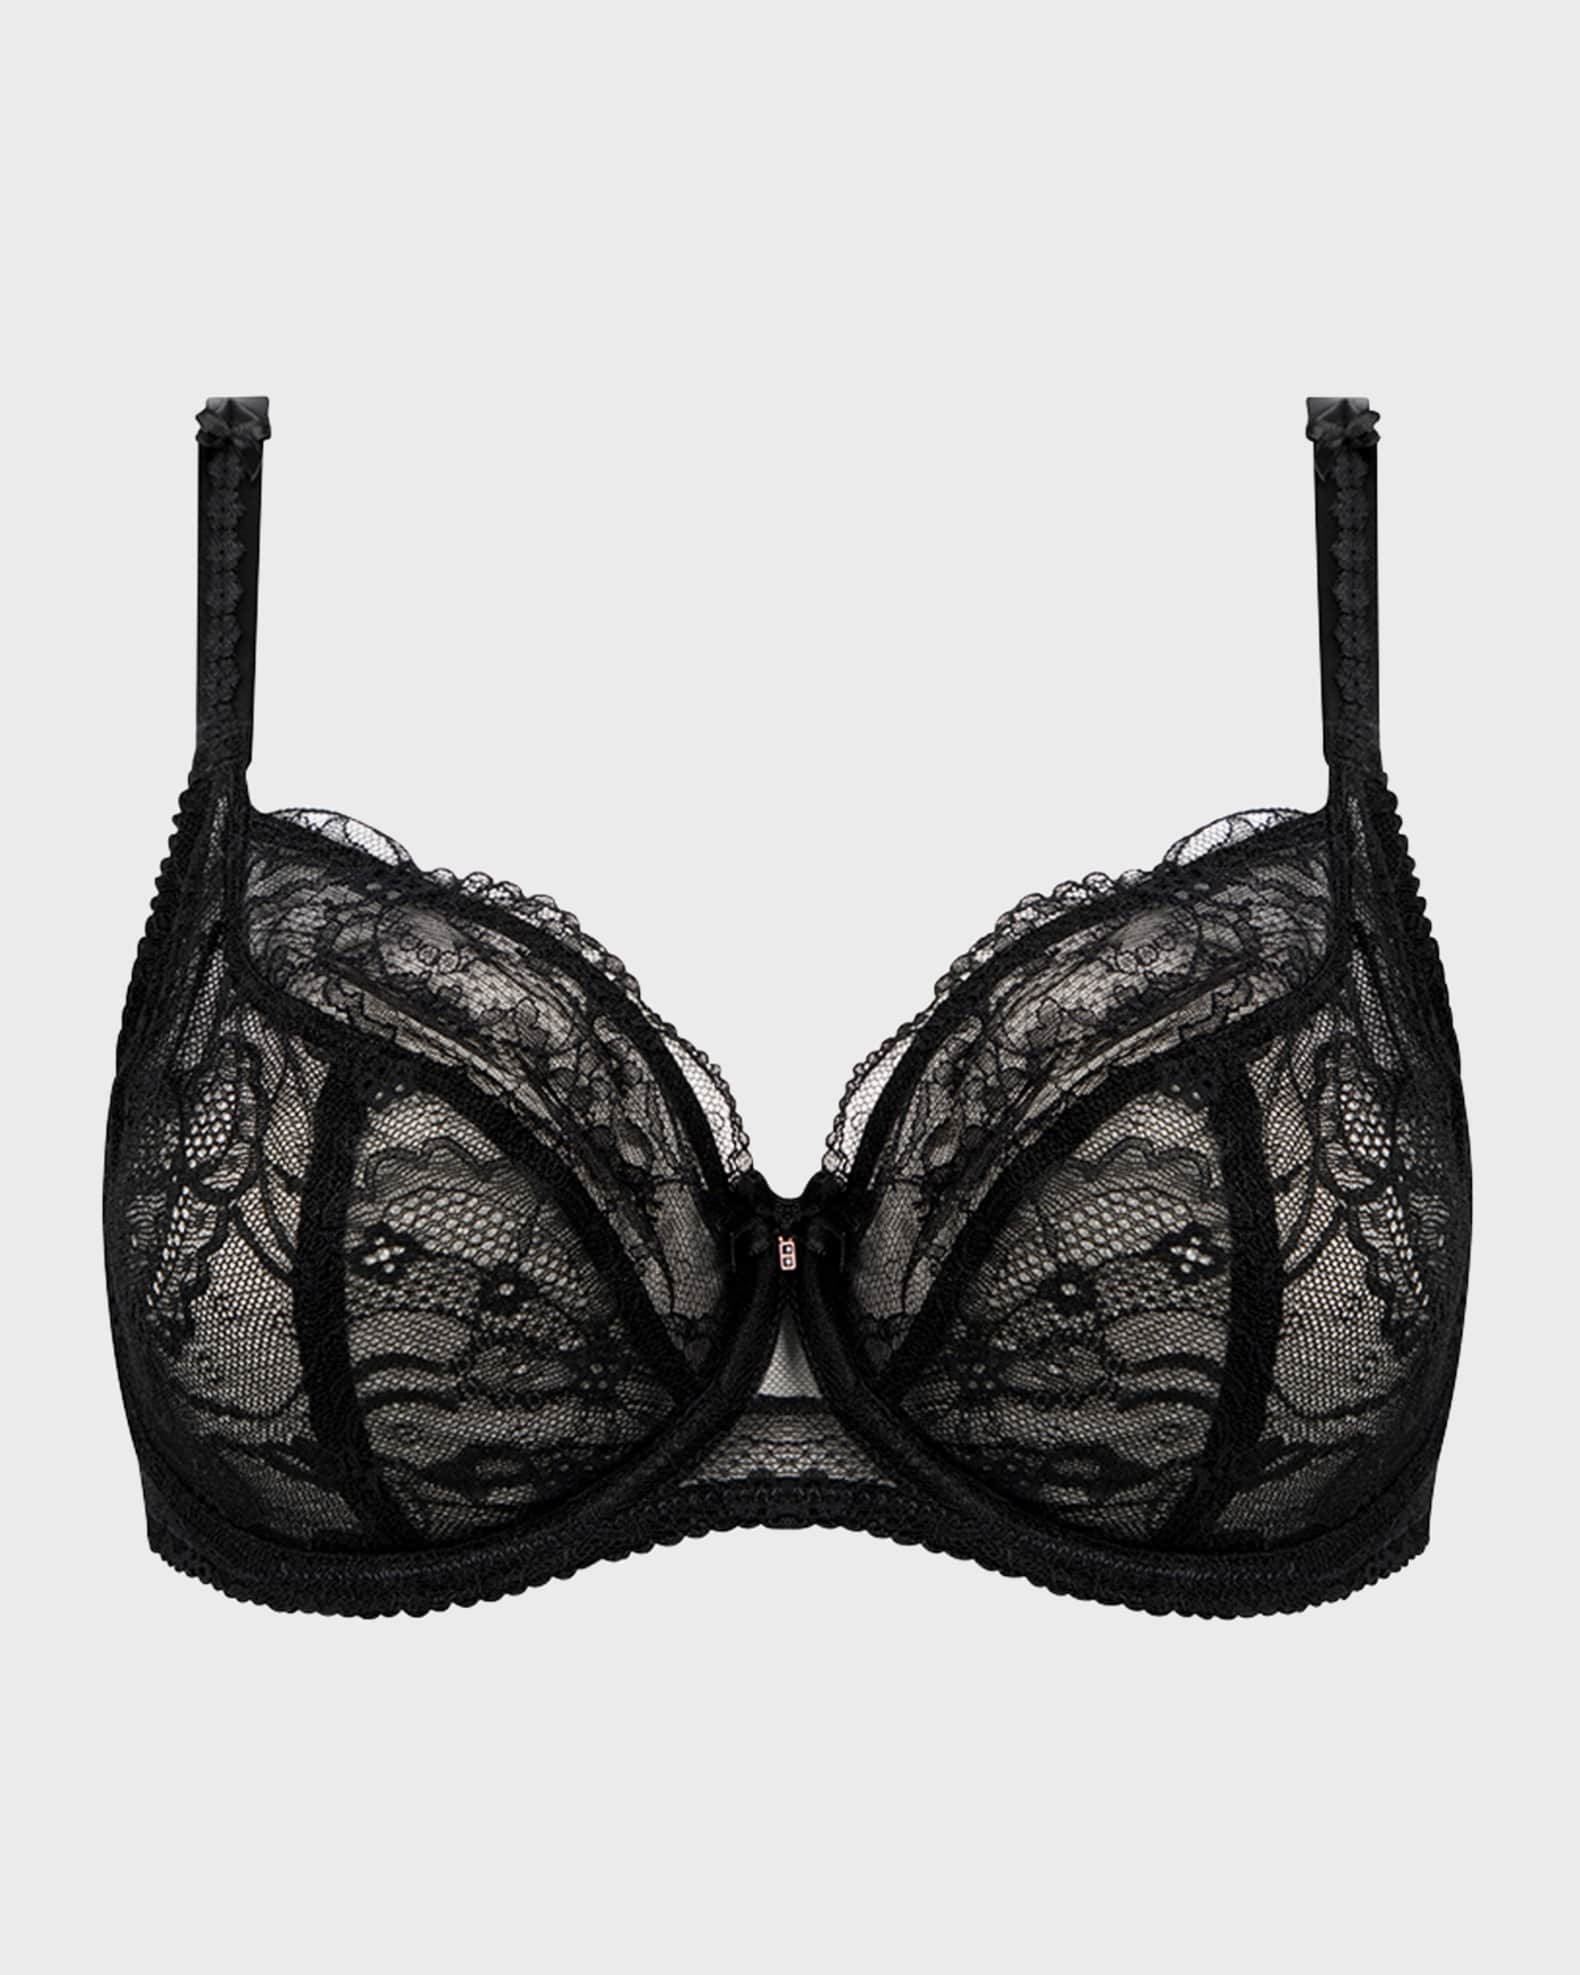 Lise Charmel Feerie Couture Floral Lace Full-Cup Bra